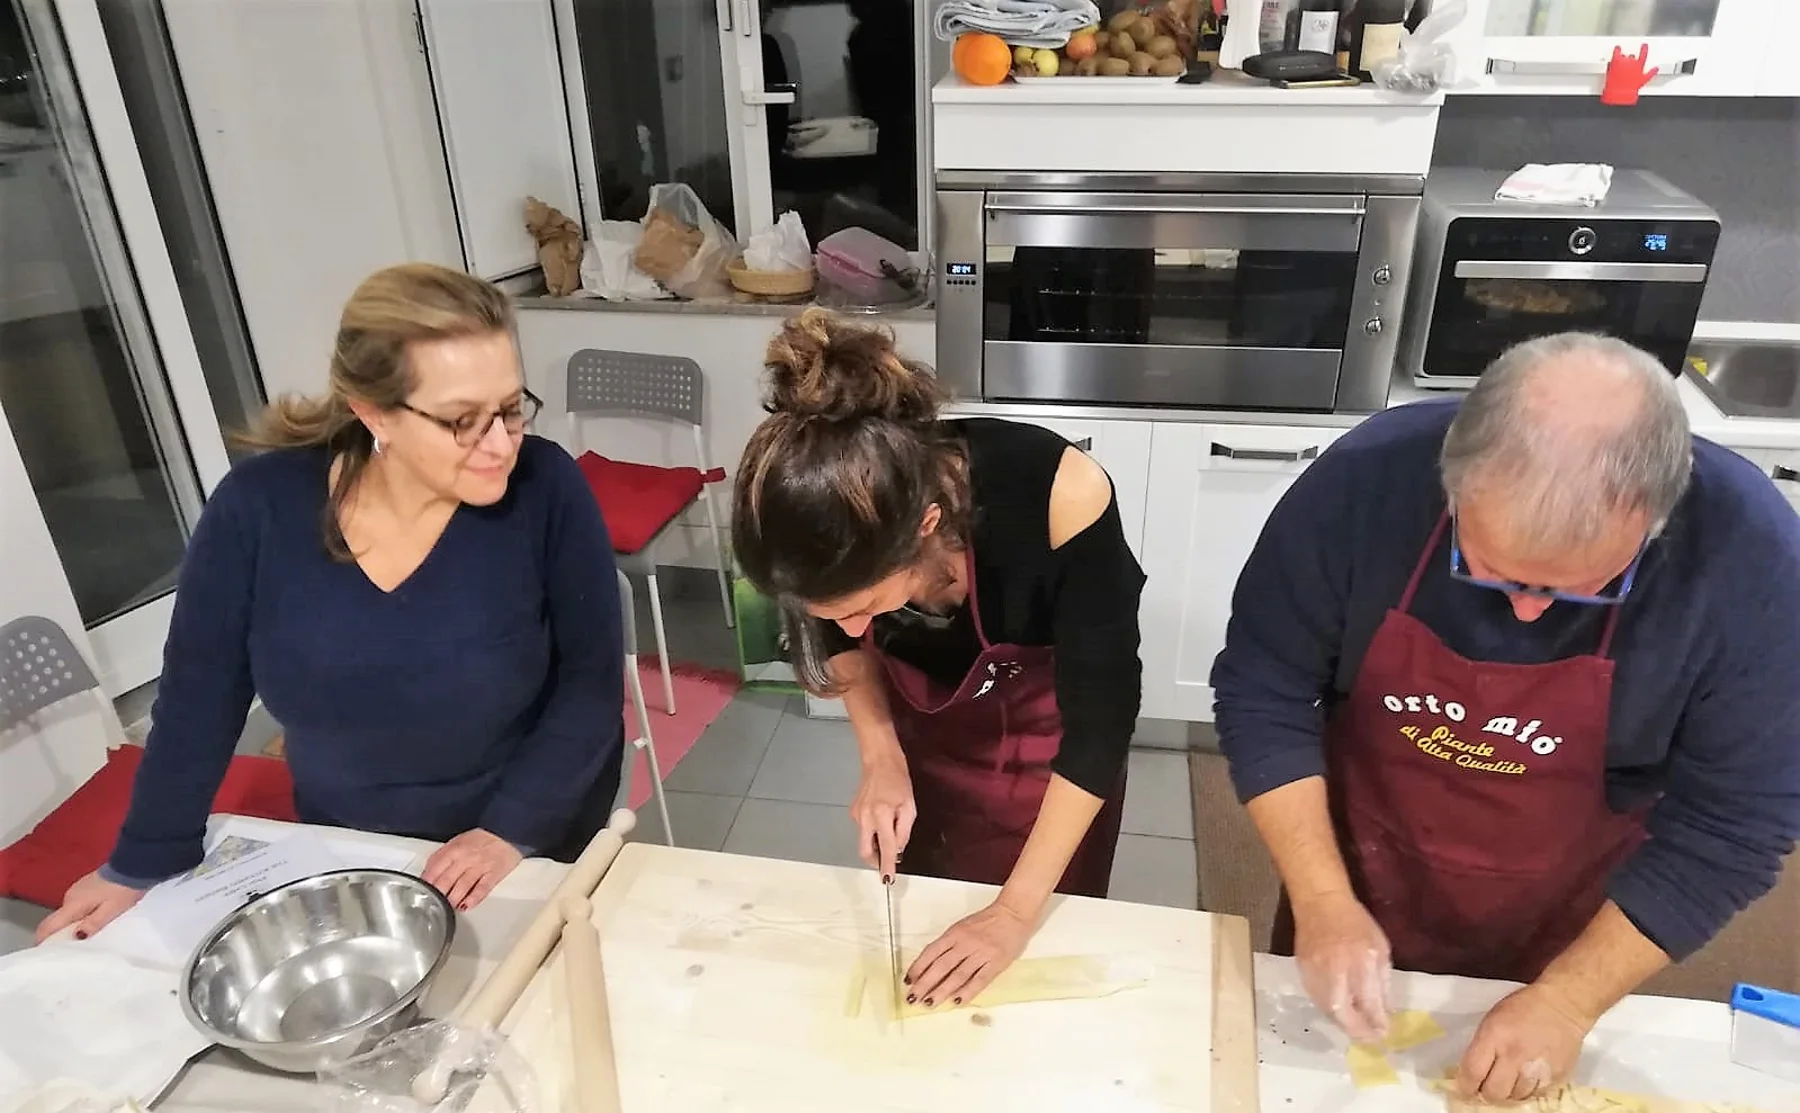 Fresh pasta making class and dinner by the Tiber river - 1306878